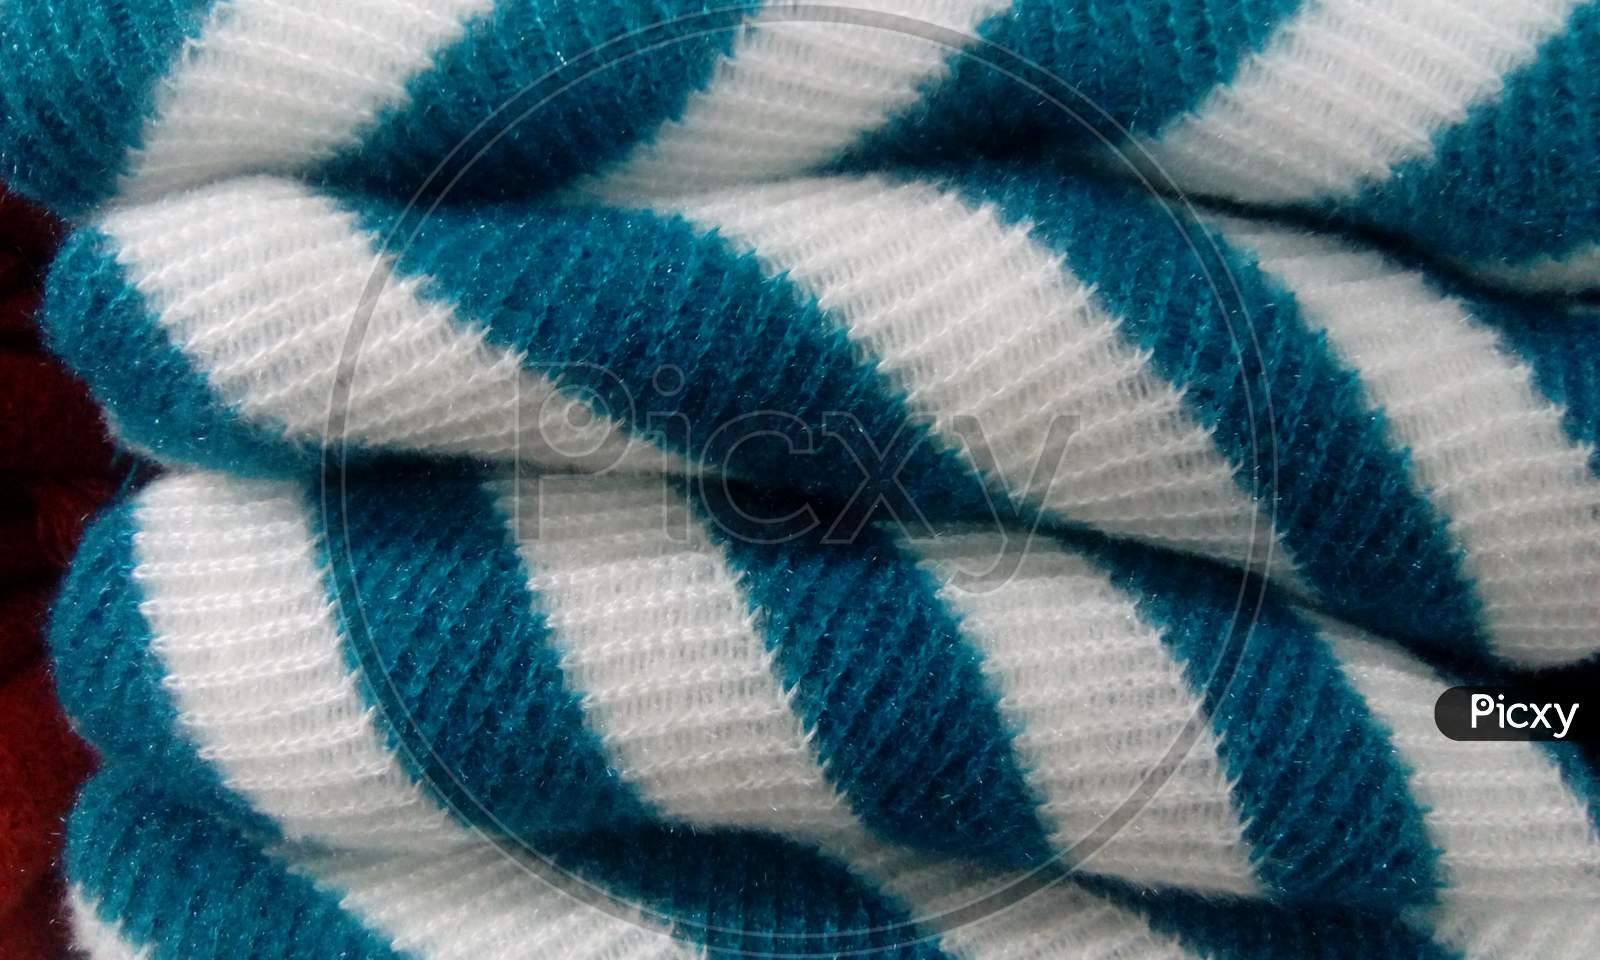 Clothes With Fabric texture In a Closet Of a Store Closeup